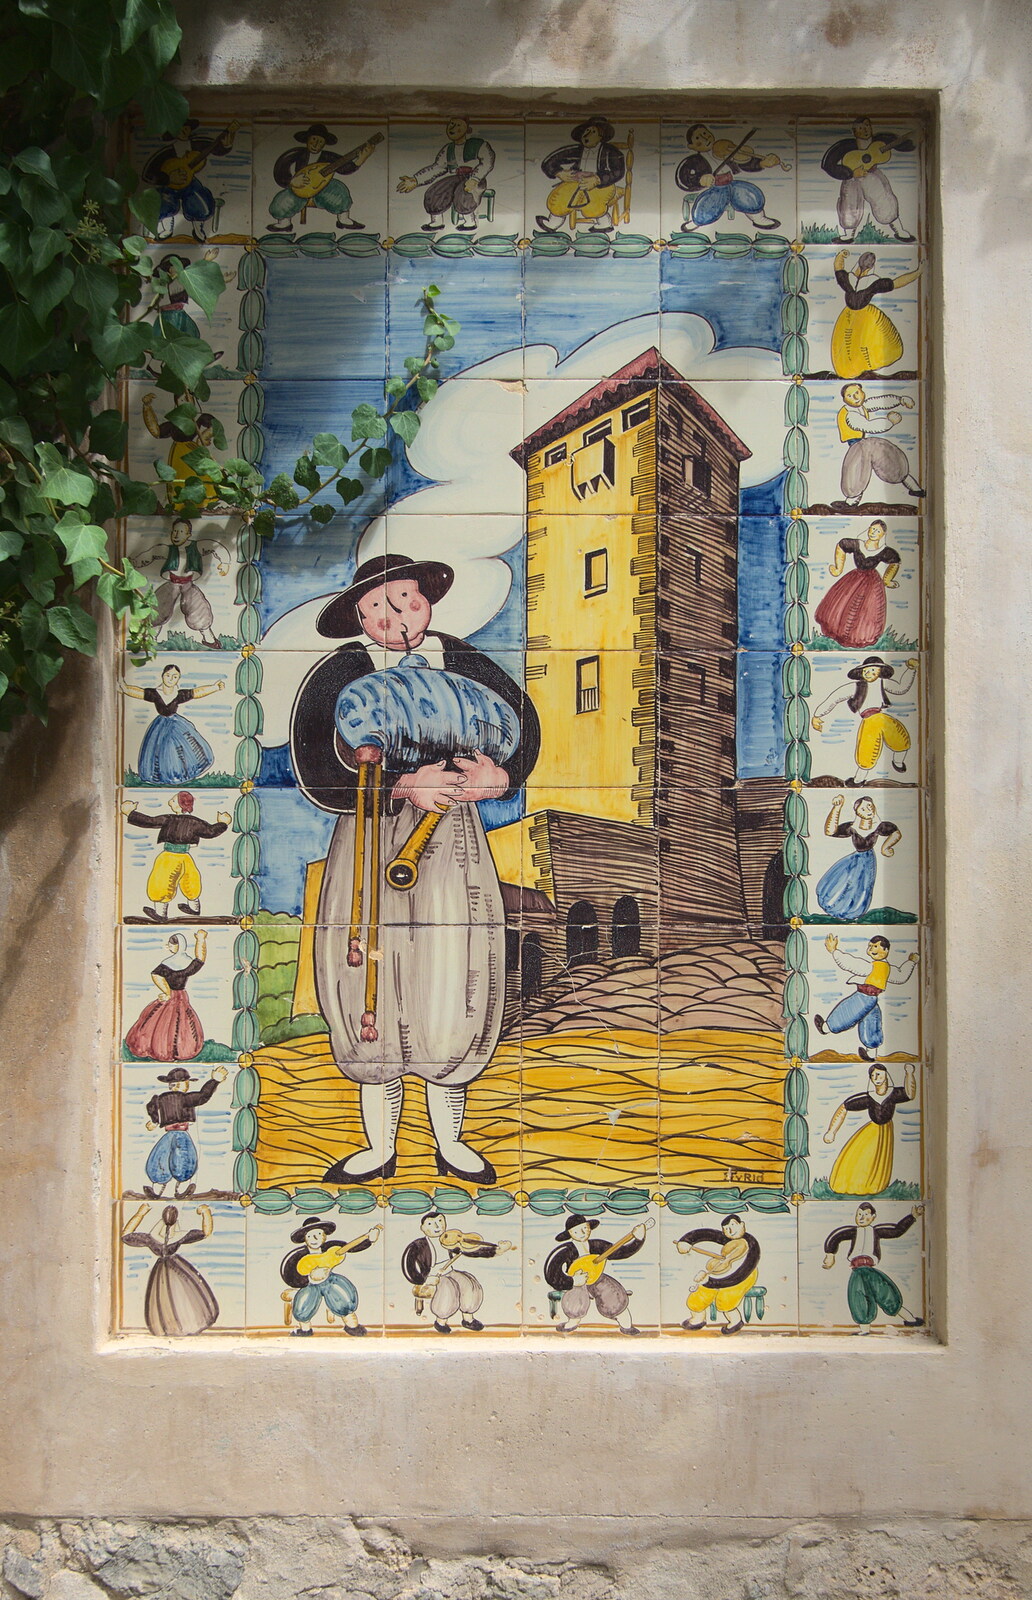 Tiled painting on a wall from A Few Hours in Valdemossa, Mallorca, Spain - 13th September 2012